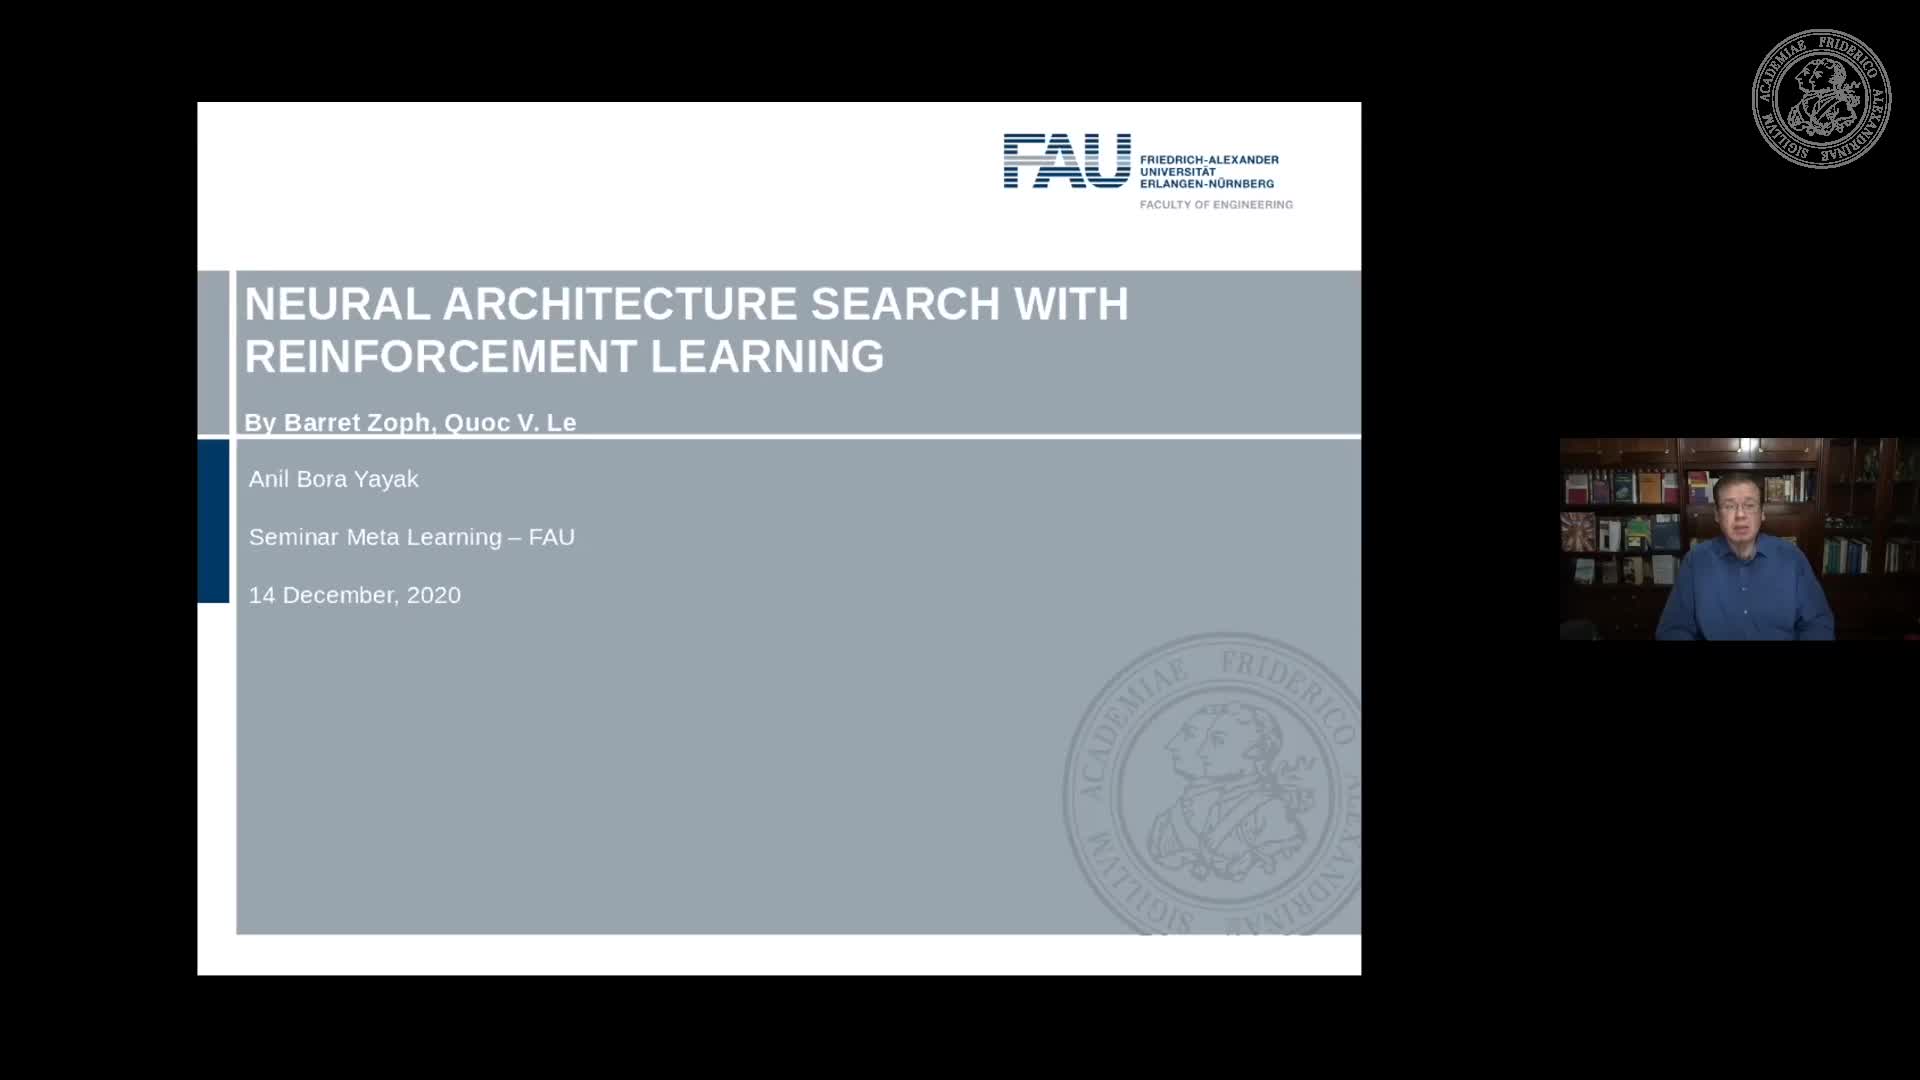 Seminar Meta Learning (SemMeL) - Anil Bora Yayak  - Neural Architecture Search with Reinforcement Learning preview image